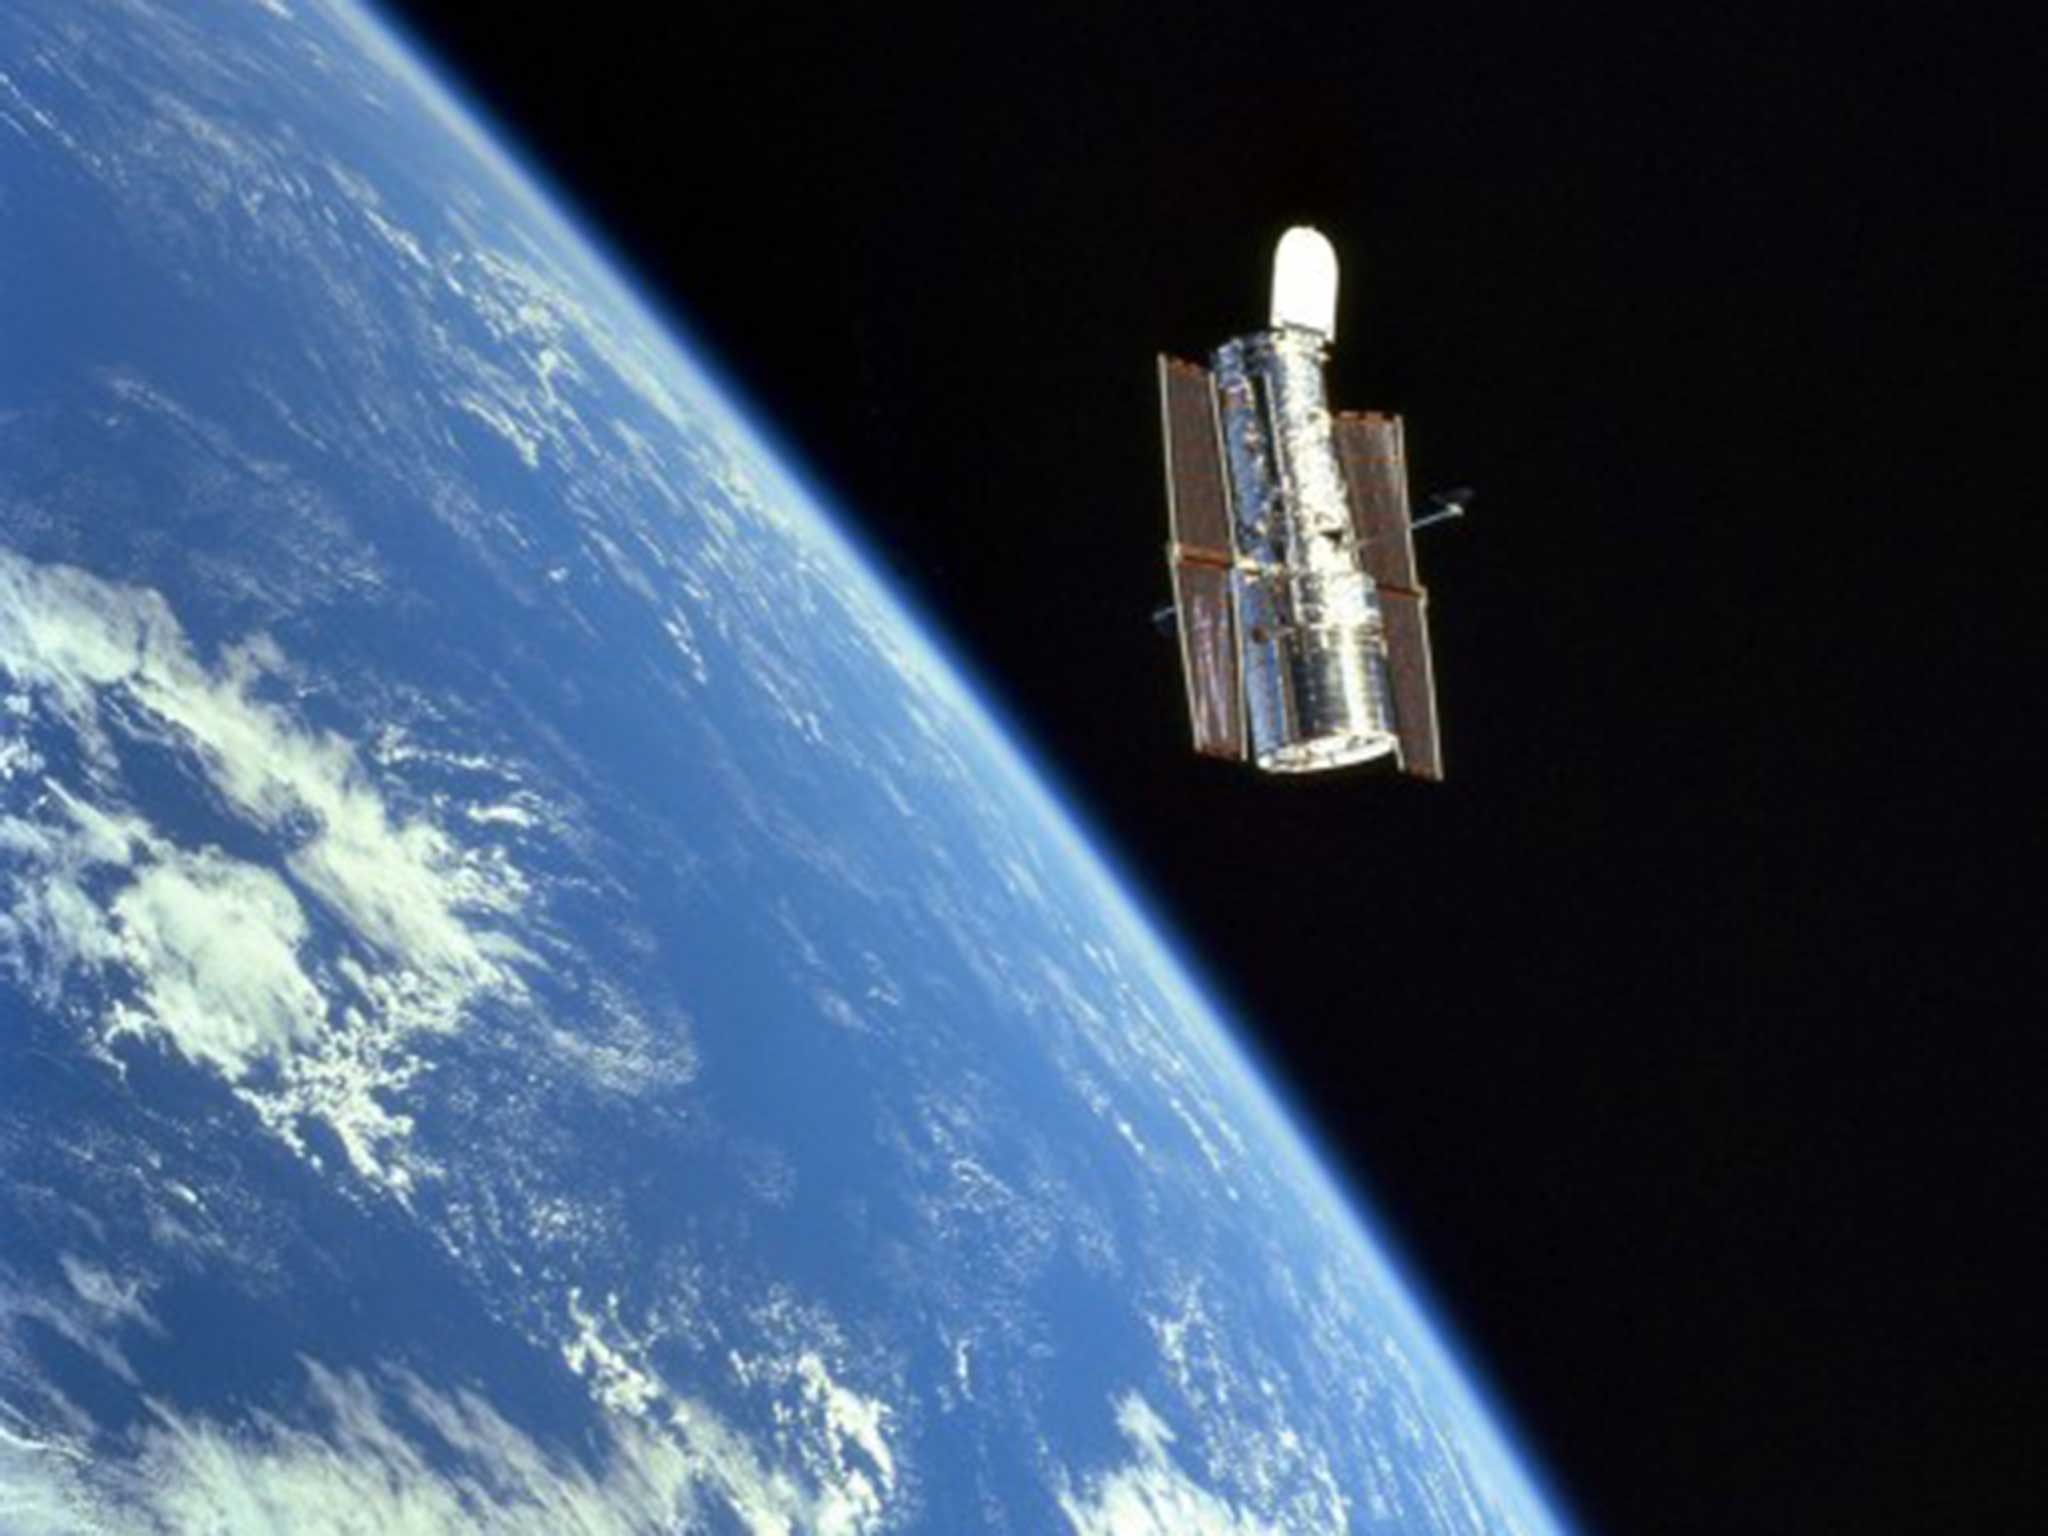 The Hubble telescope was launched on 24 April 1990